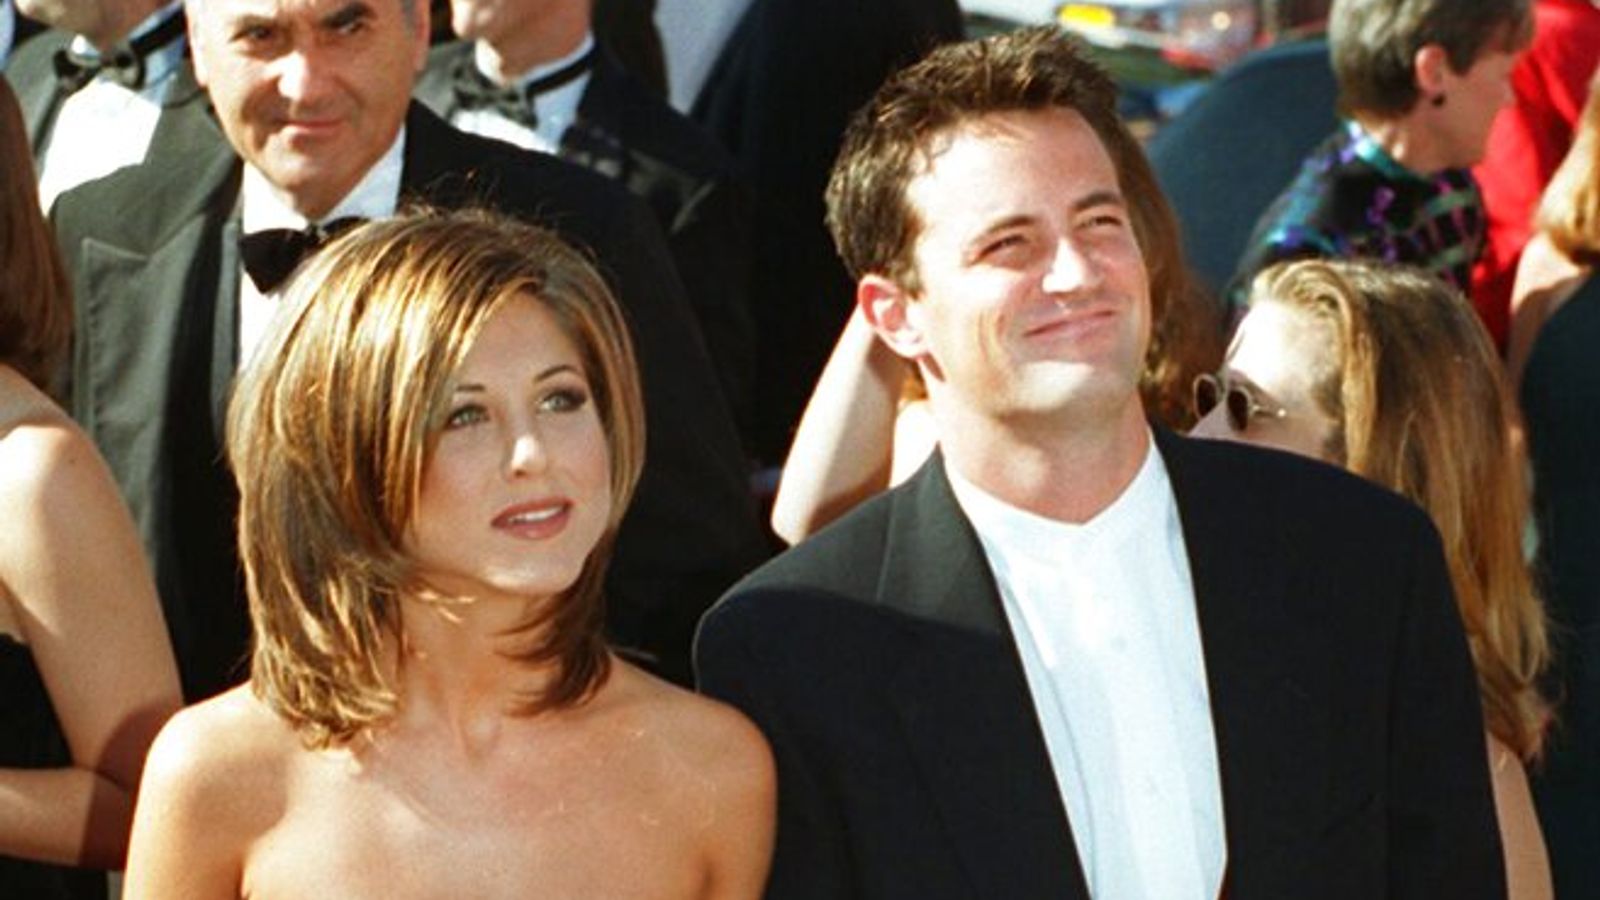 Friends stars Jennifer Aniston and David Schwimmer pay tribute to Matthew Perry